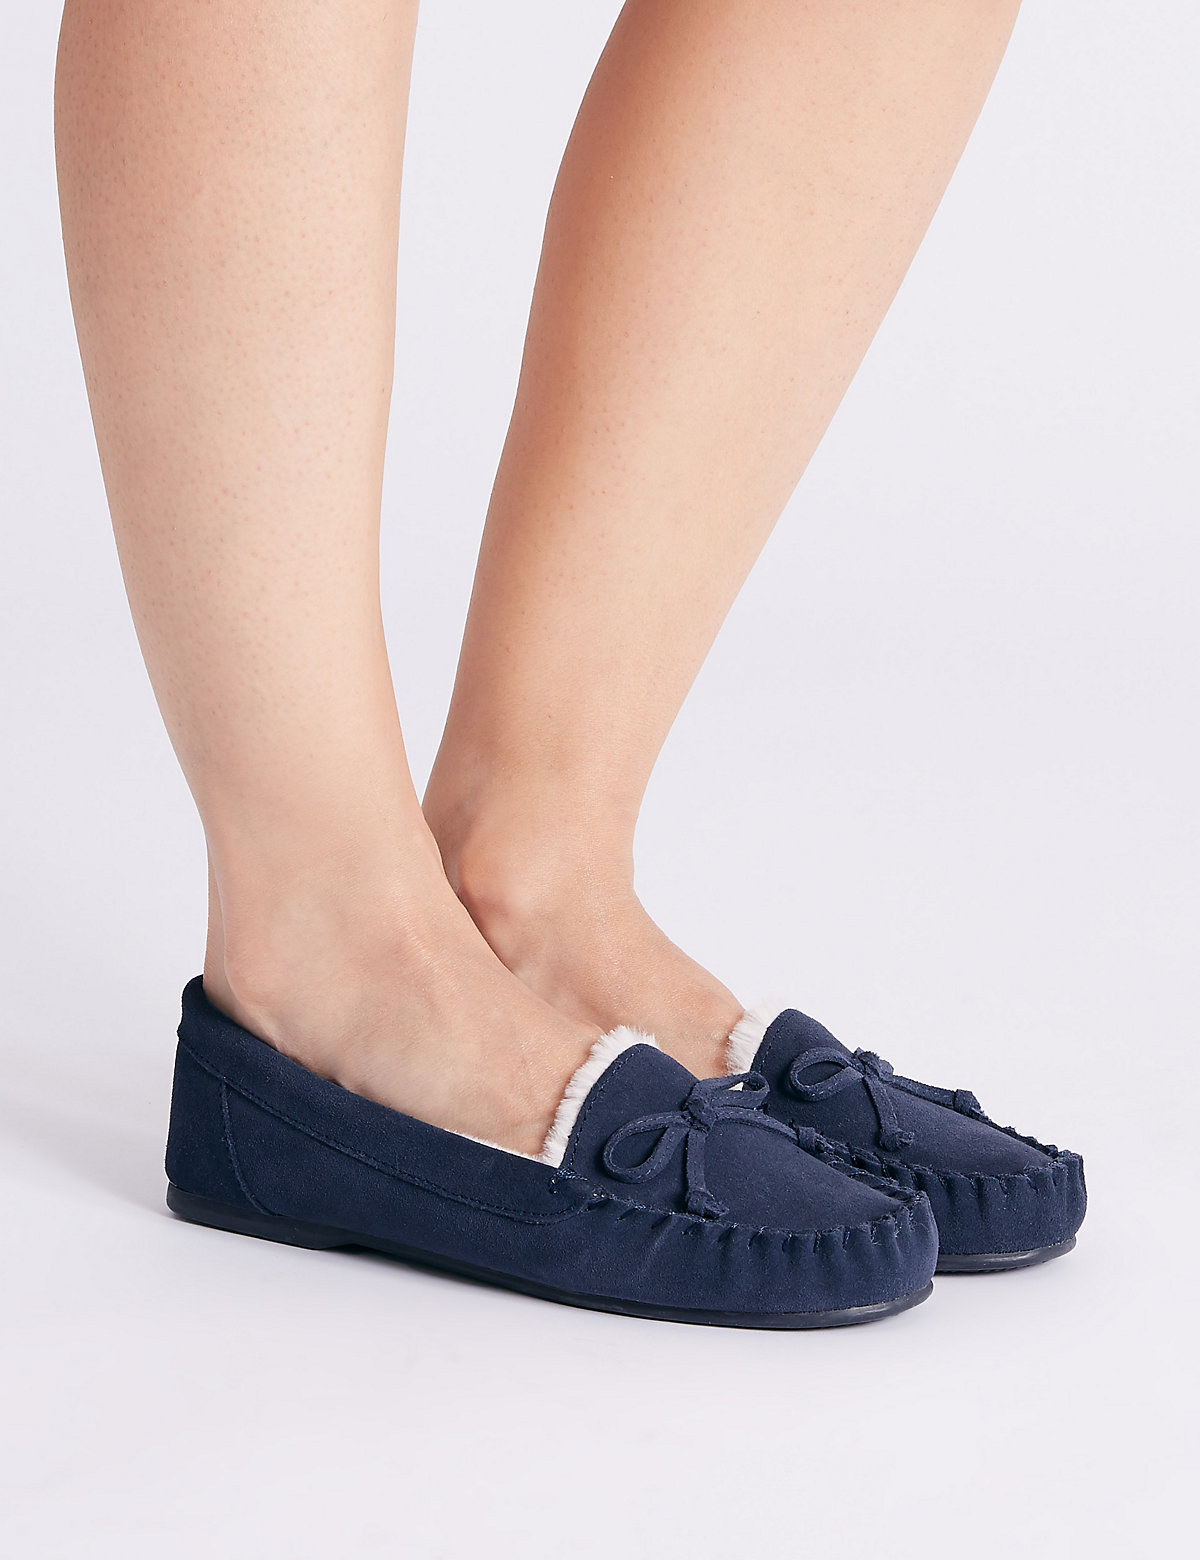 Suede Moccasin Slippers with Freshfeet™